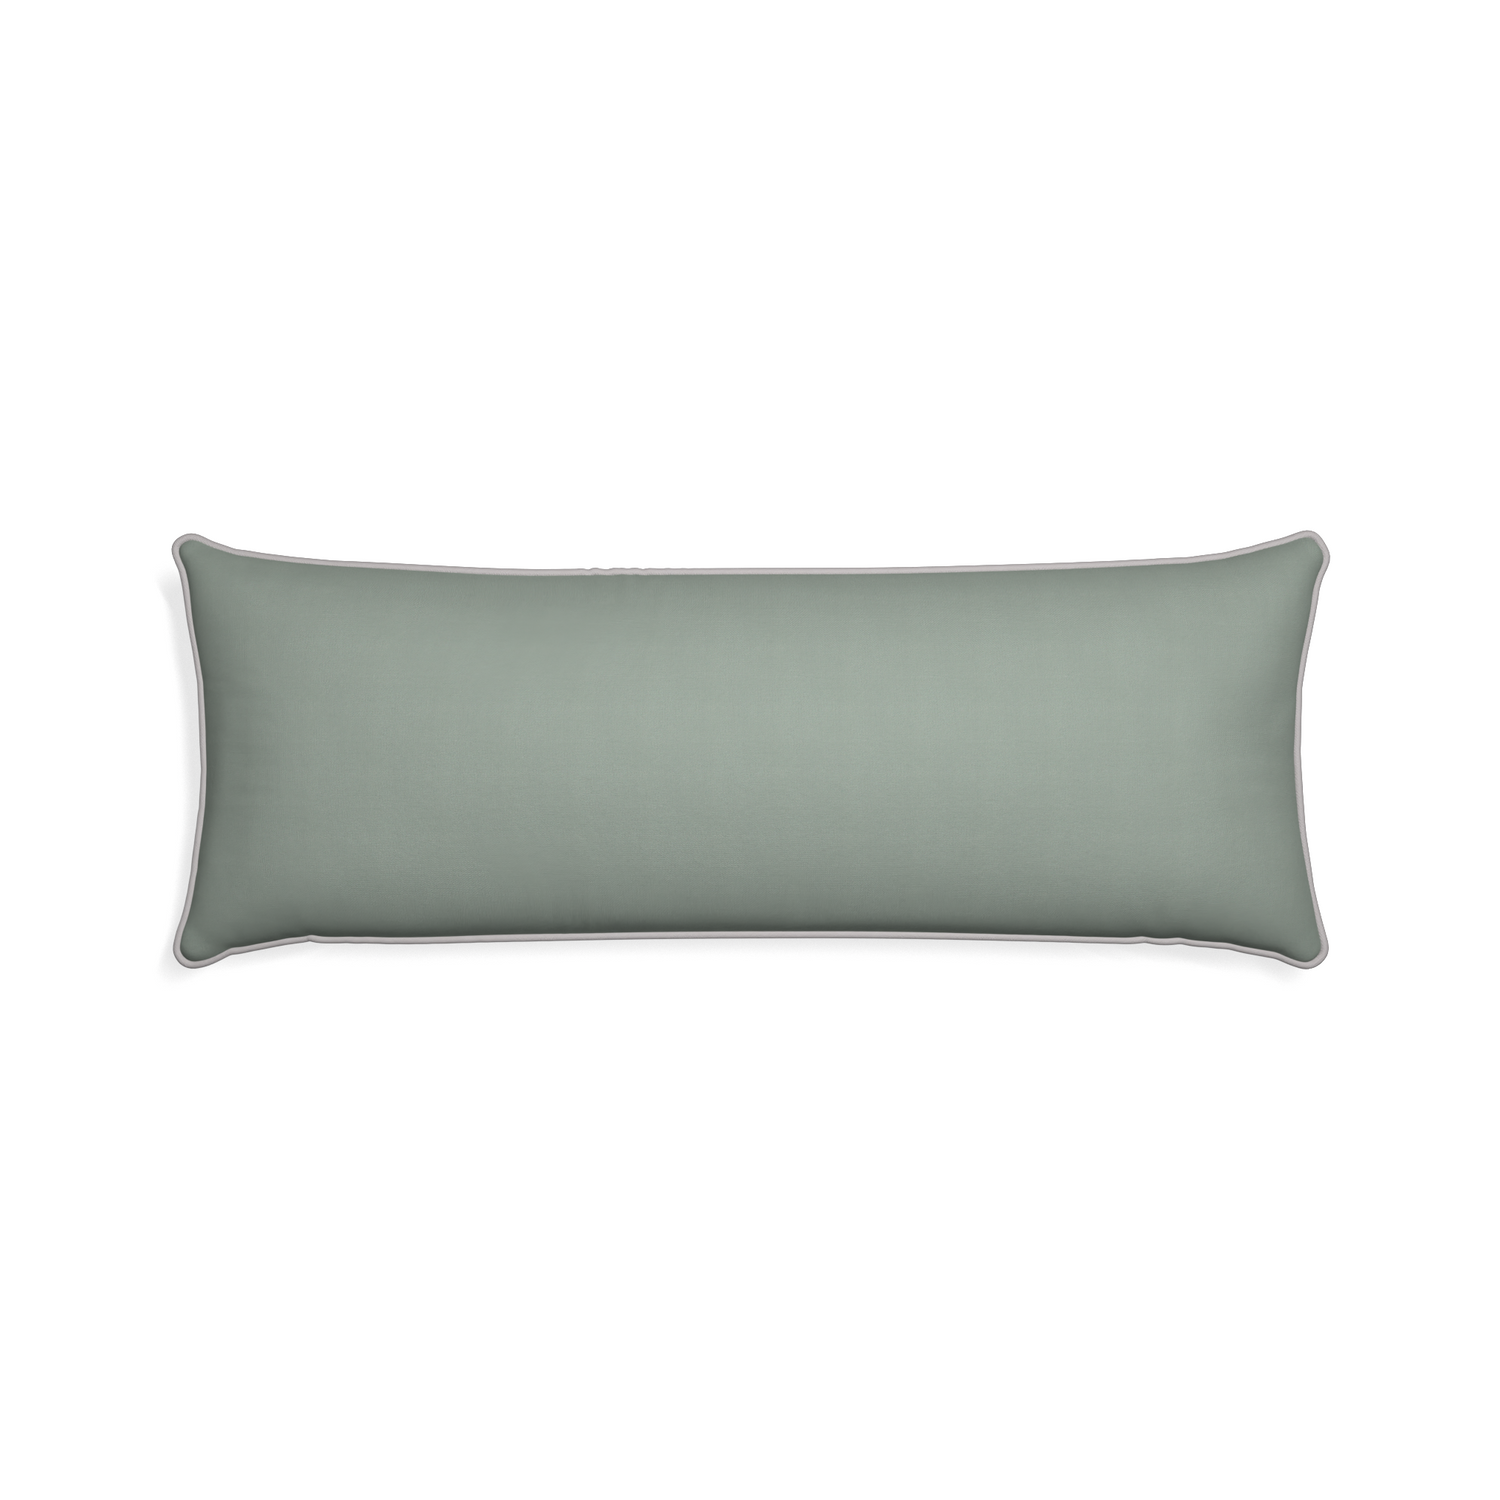 Xl-lumbar sage custom sage green cottonpillow with pebble piping on white background